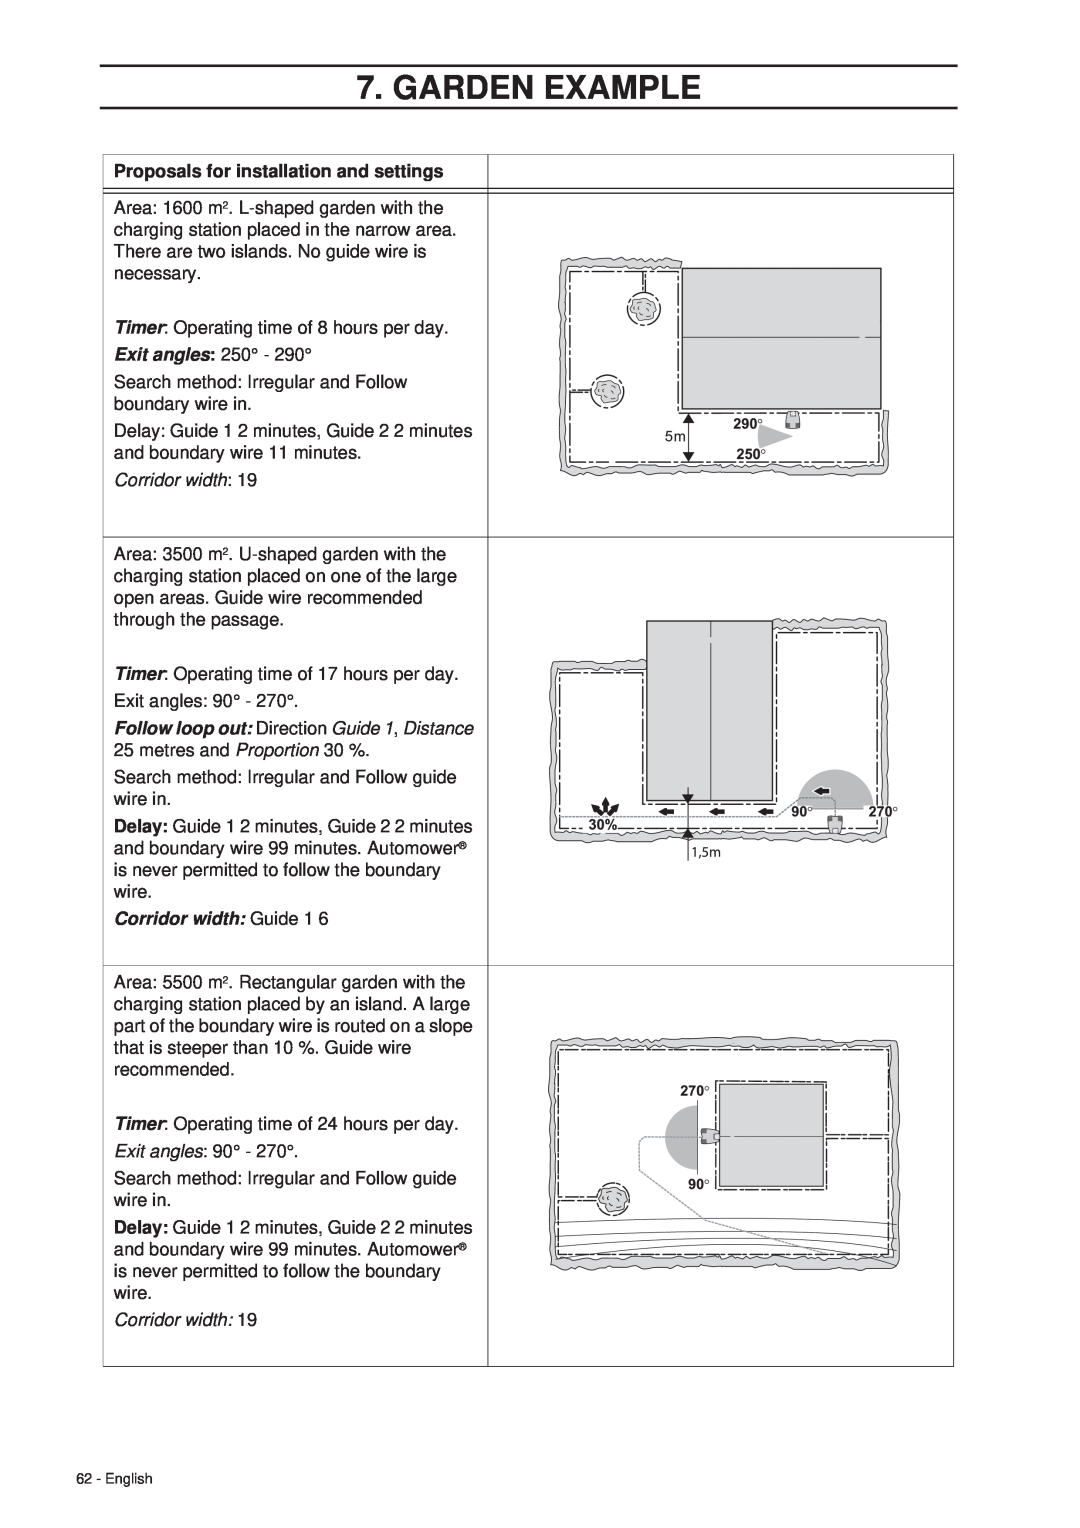 Husqvarna 260 ACX manual Exit angles, Corridor width: Guide 1, Garden Example, Proposals for installation and settings 